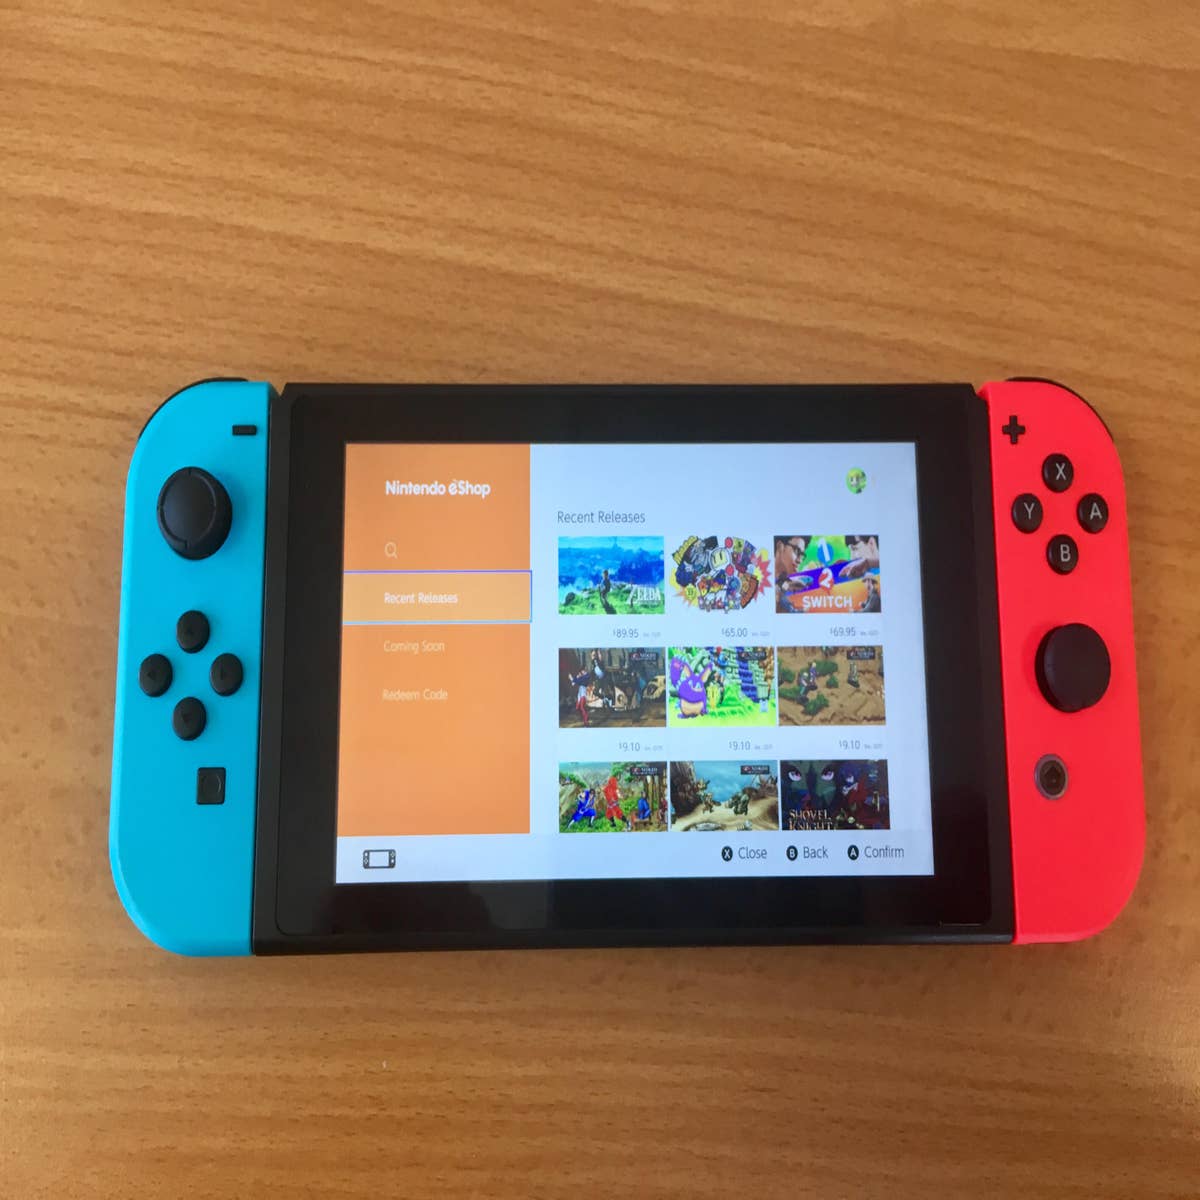 How to buy Switch eShop games from different regions like Japan